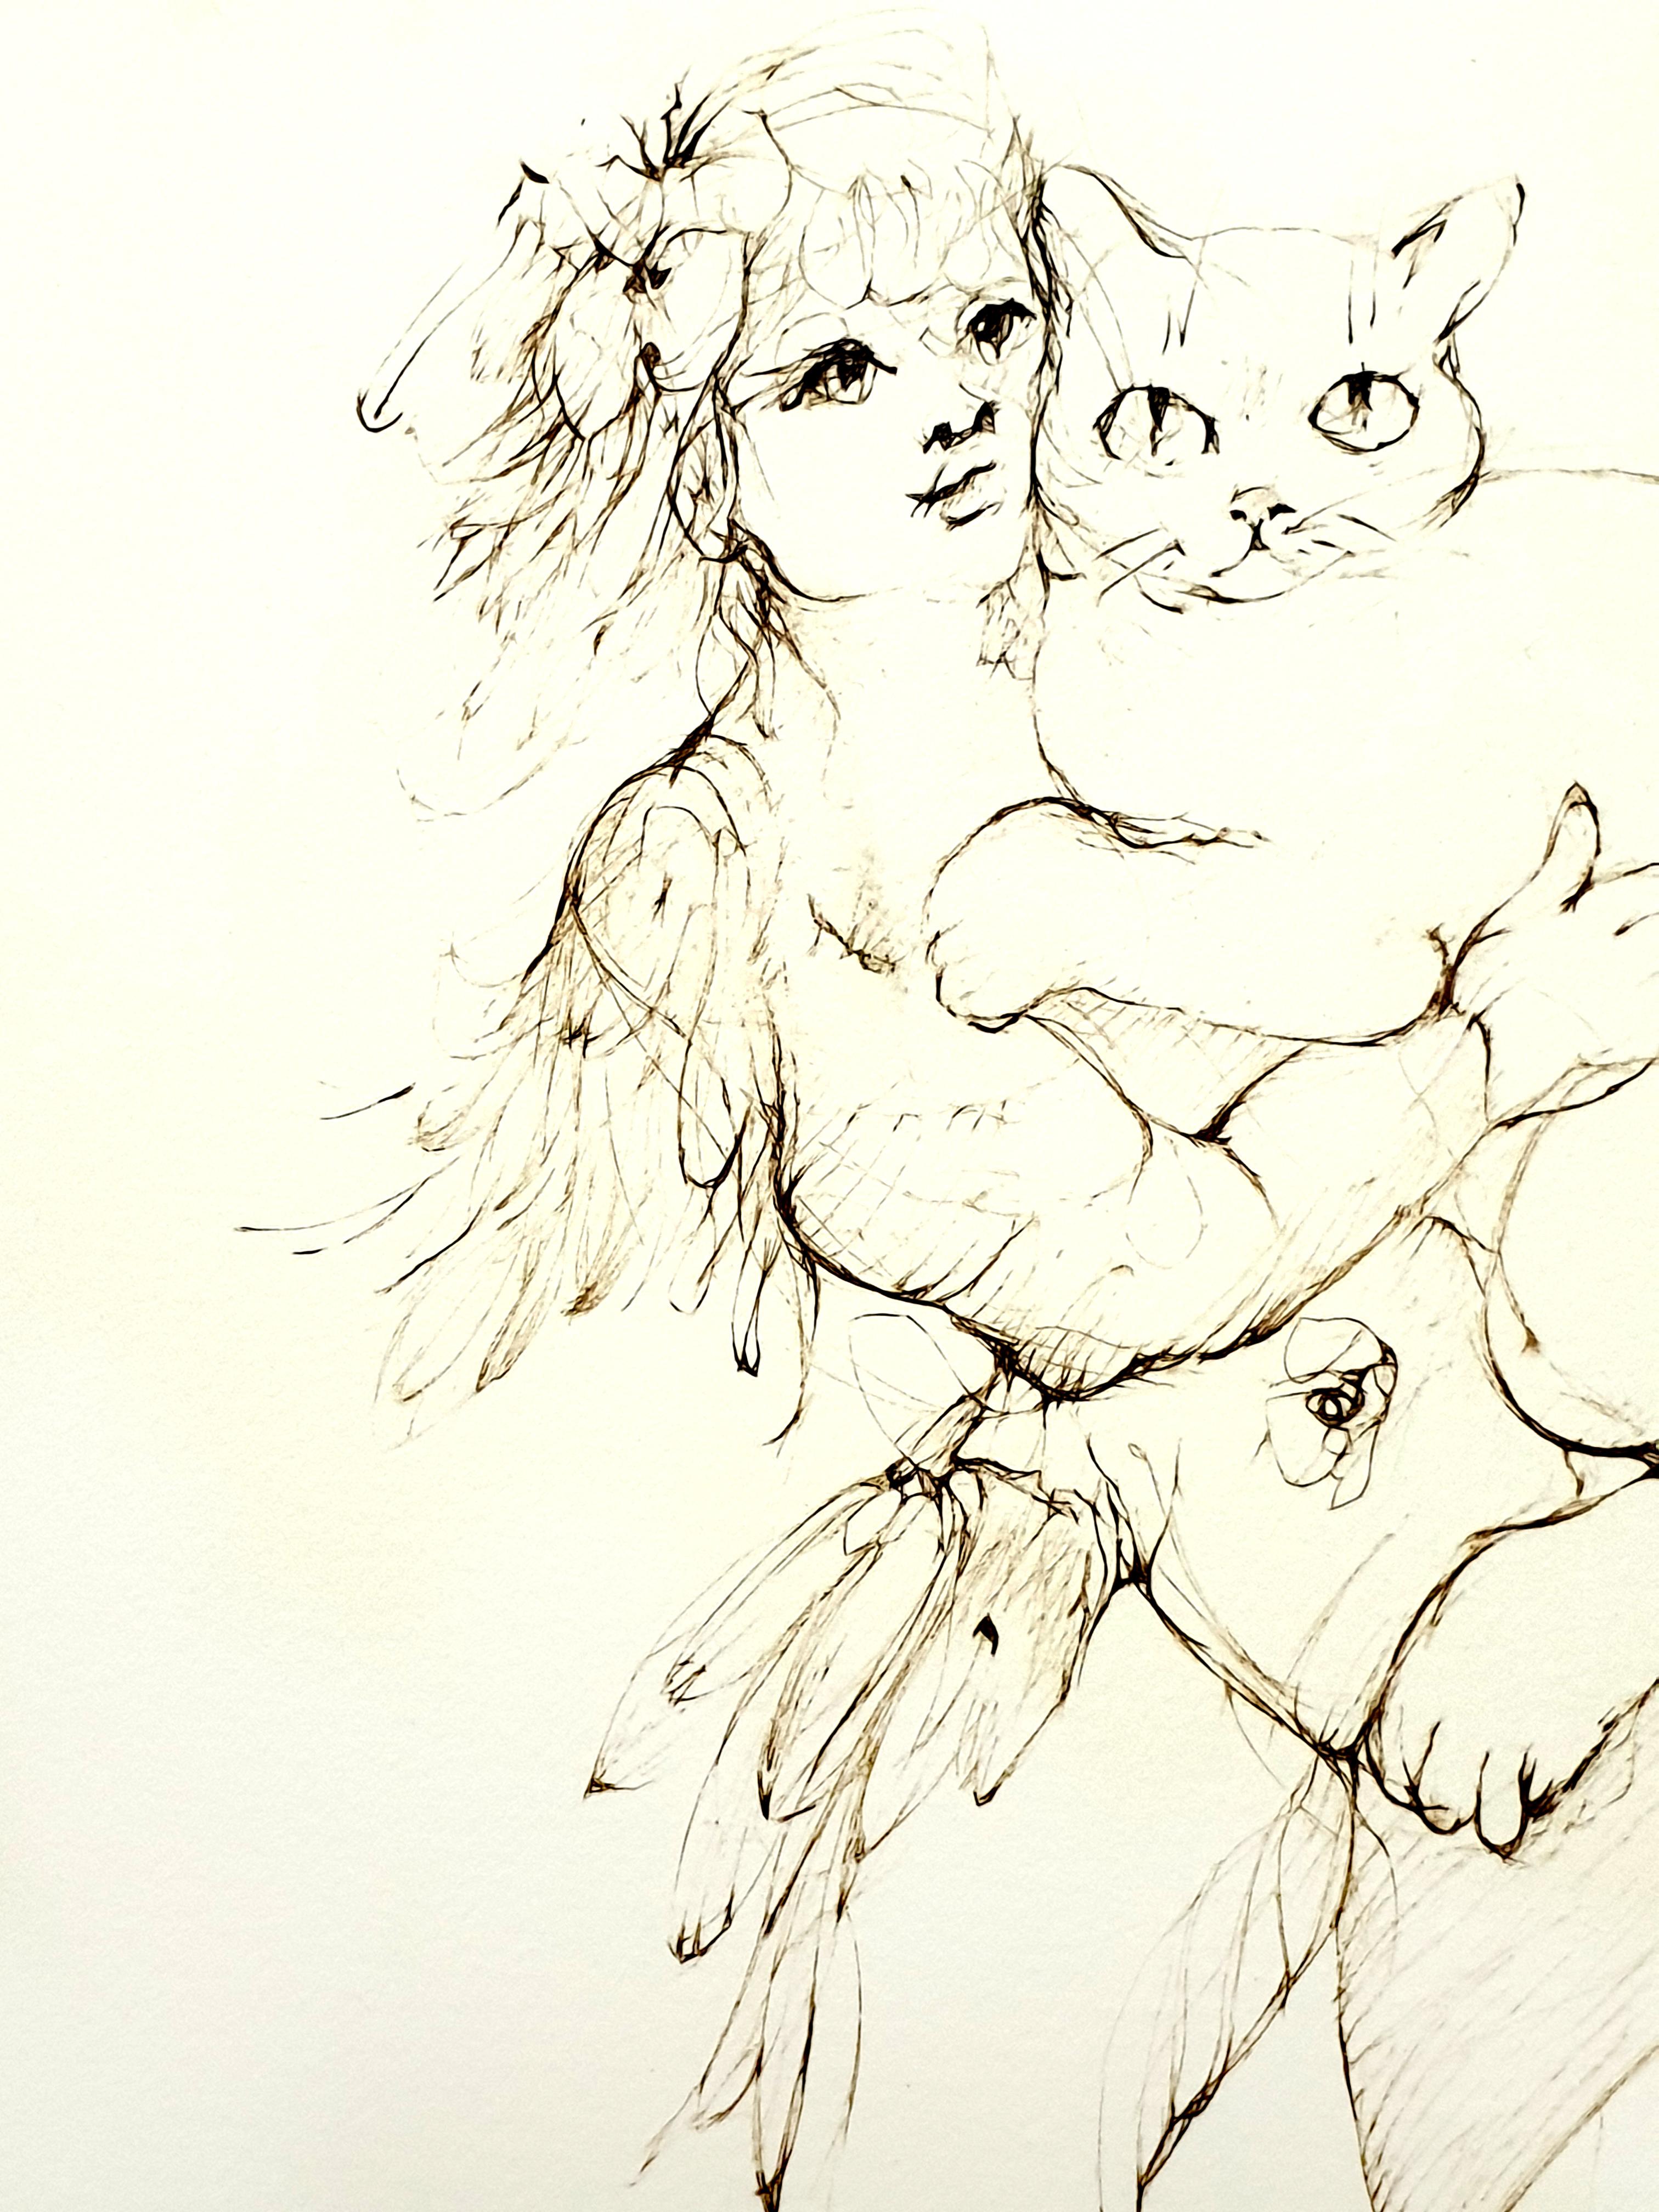 Leonor Fini - The Cat and the Woman - Original Handsigned Lithograph 7